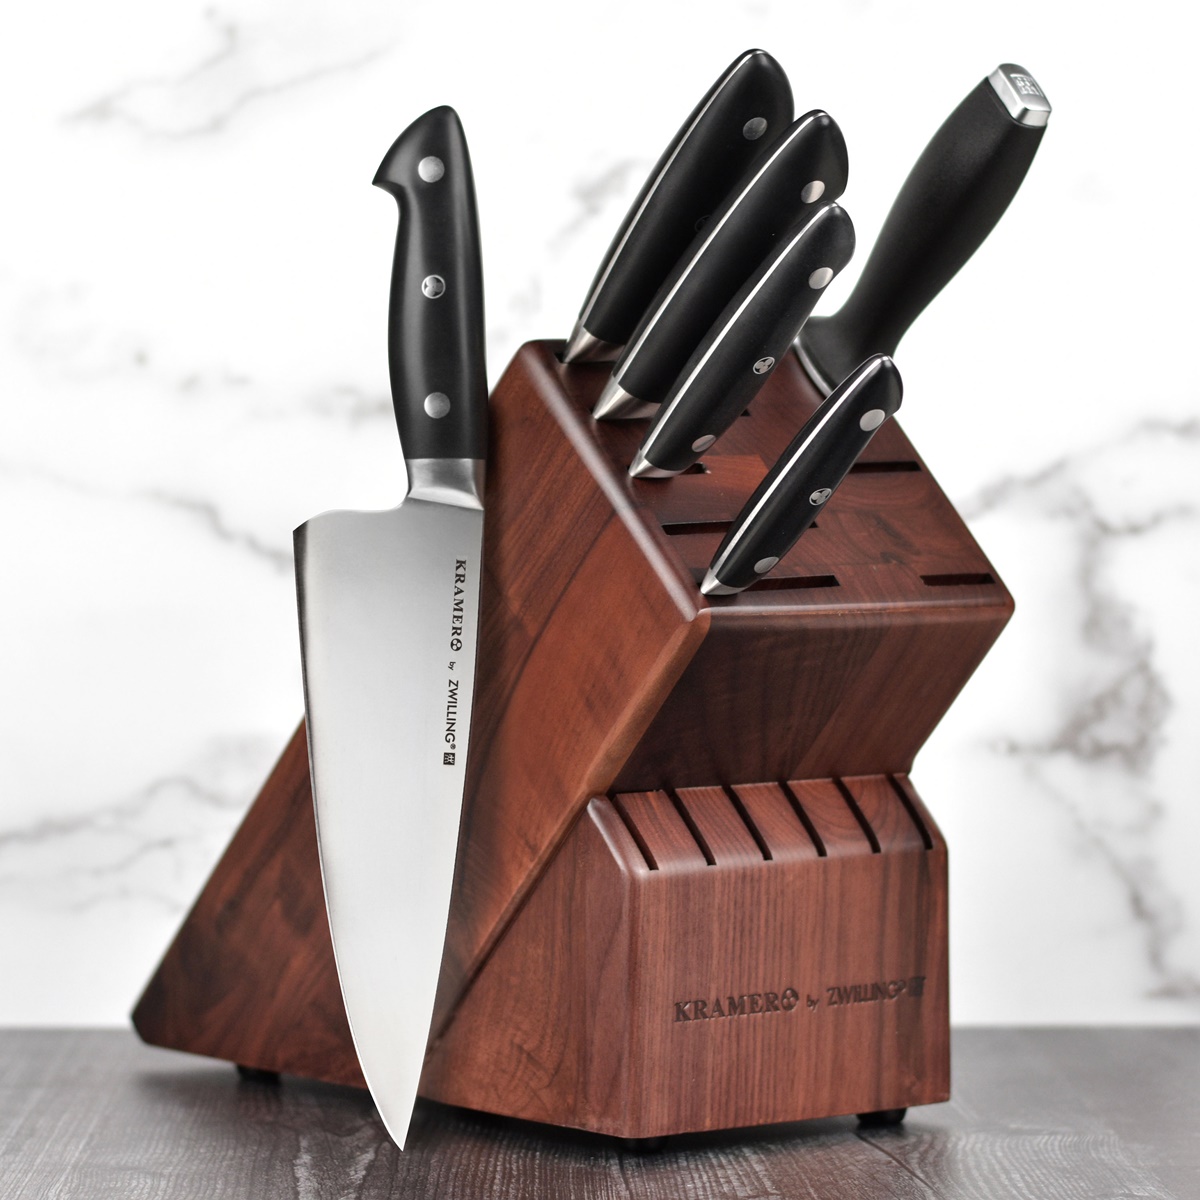 what-are-the-correct-knives-that-go-into-the-zwilling-j-a-henckels-super-knife-block